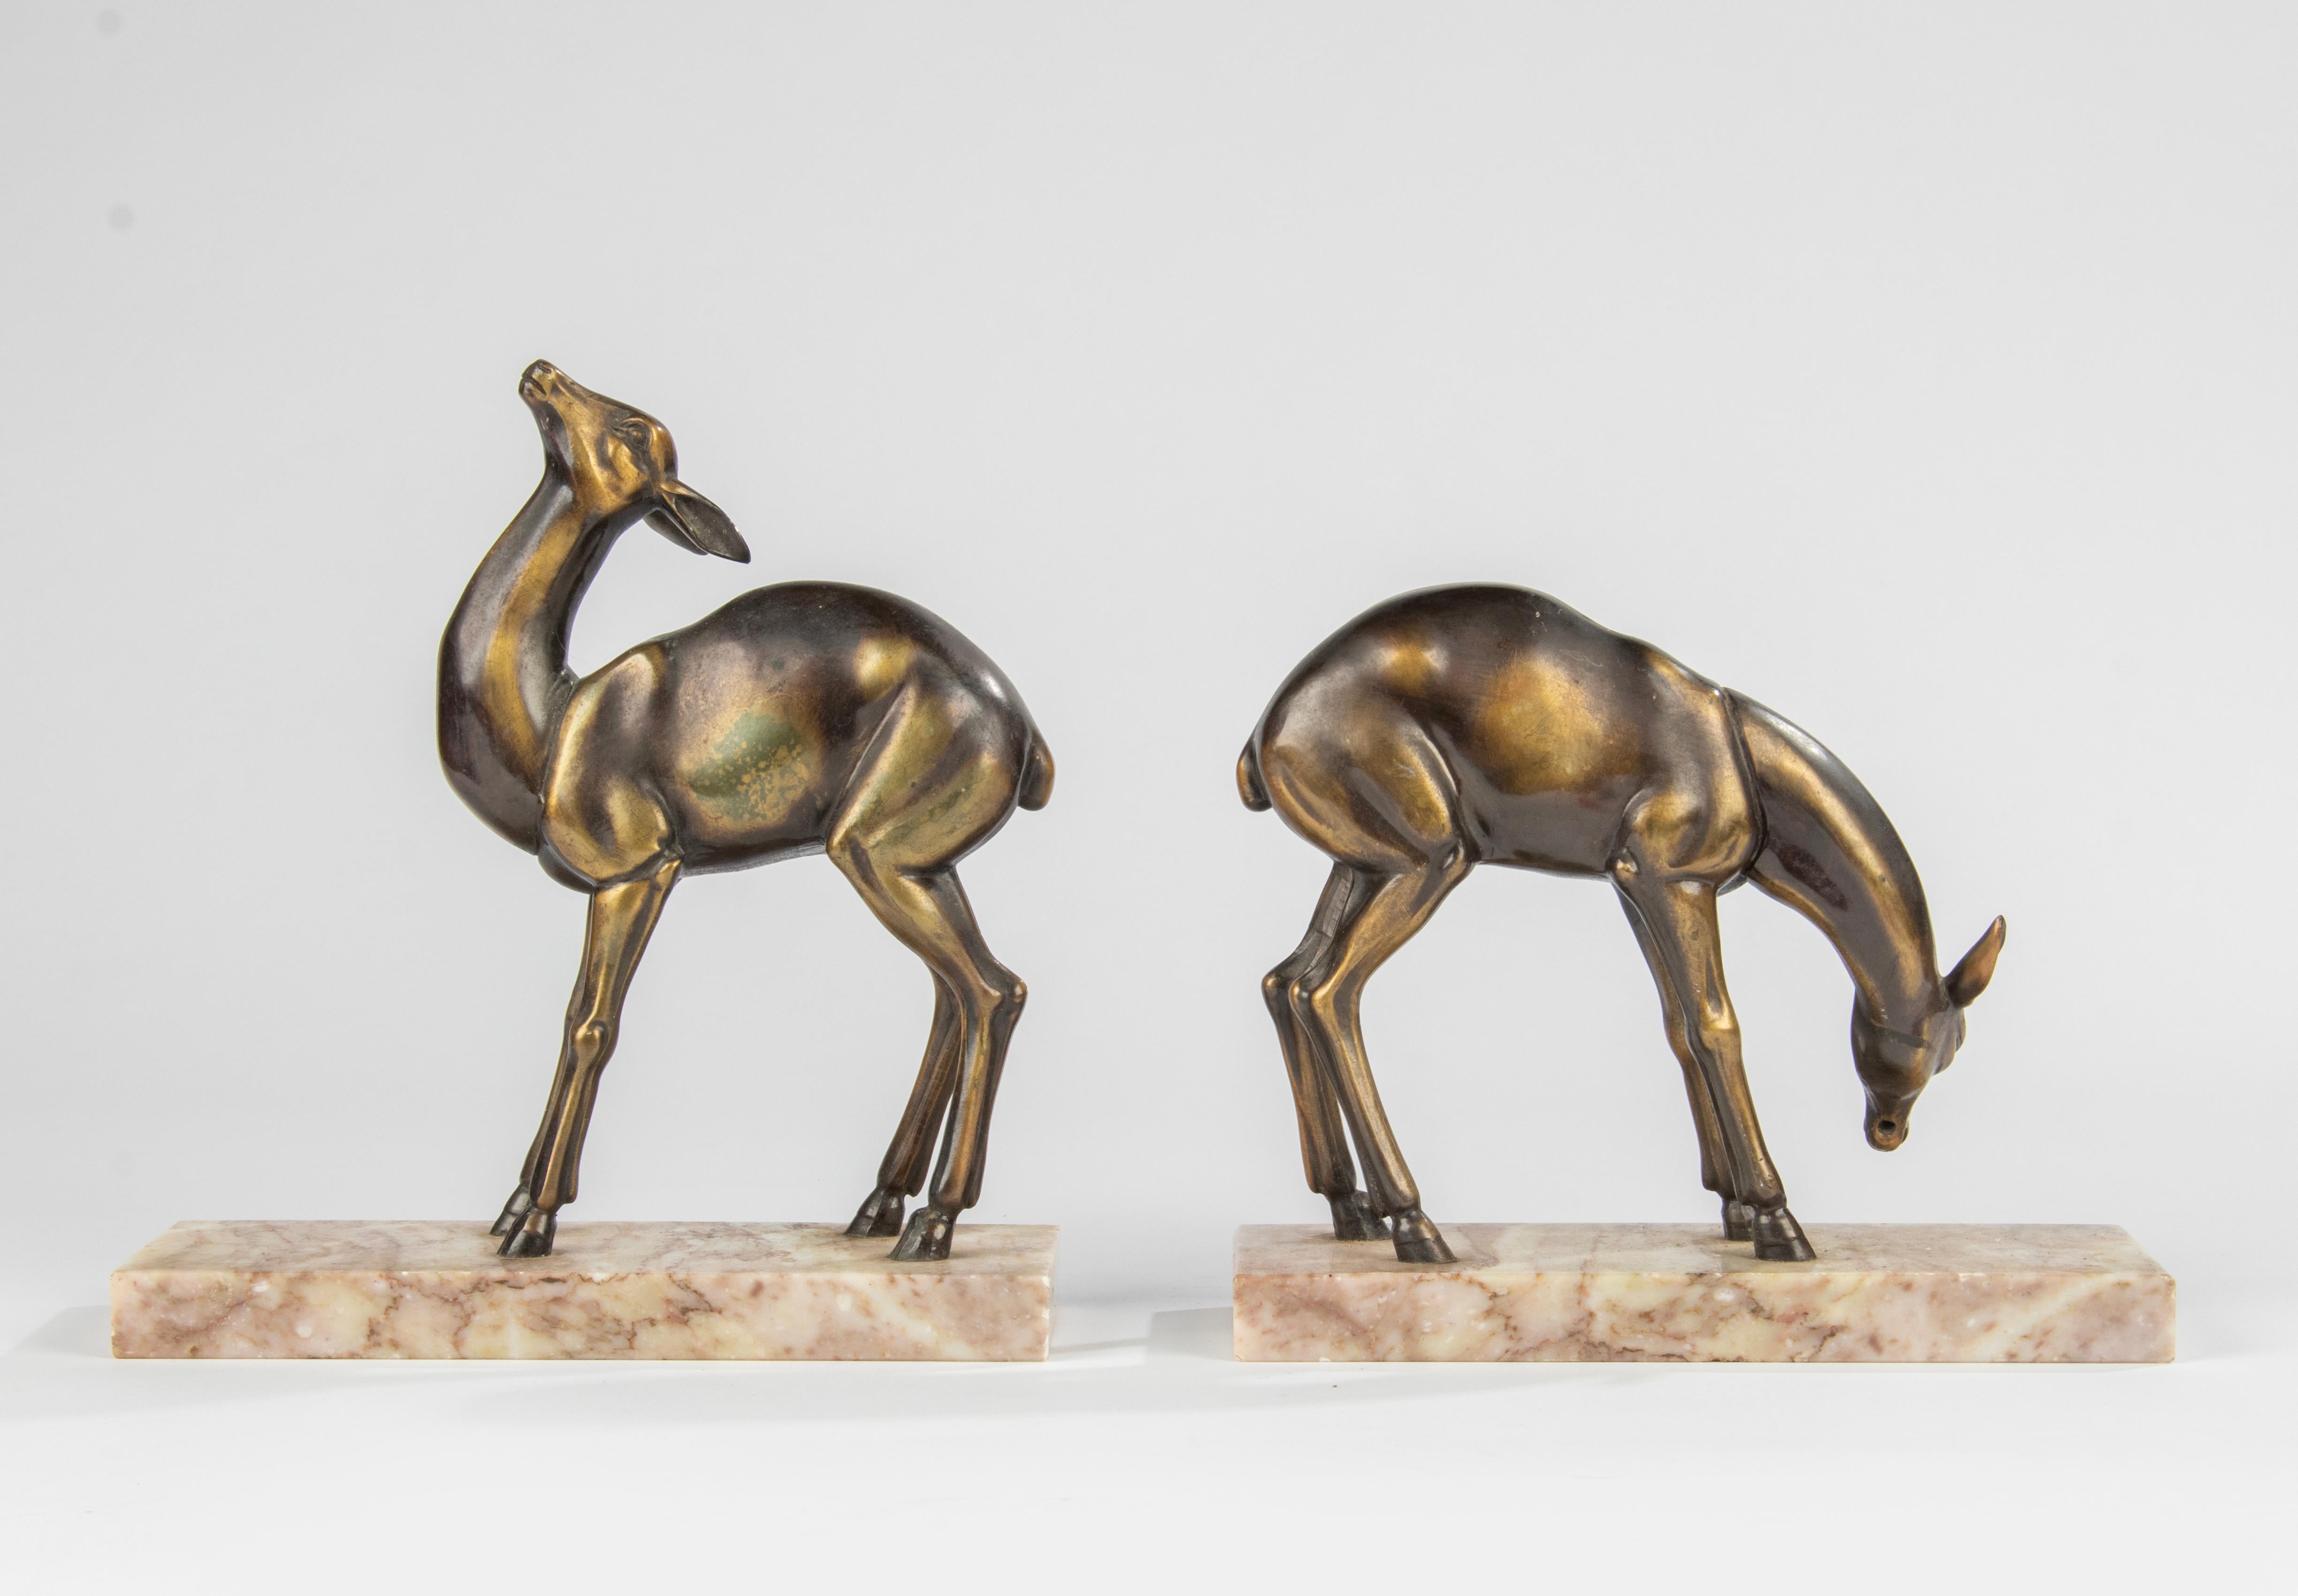 Patinated Pair Art Deco Period Spelter Bookends with Deer